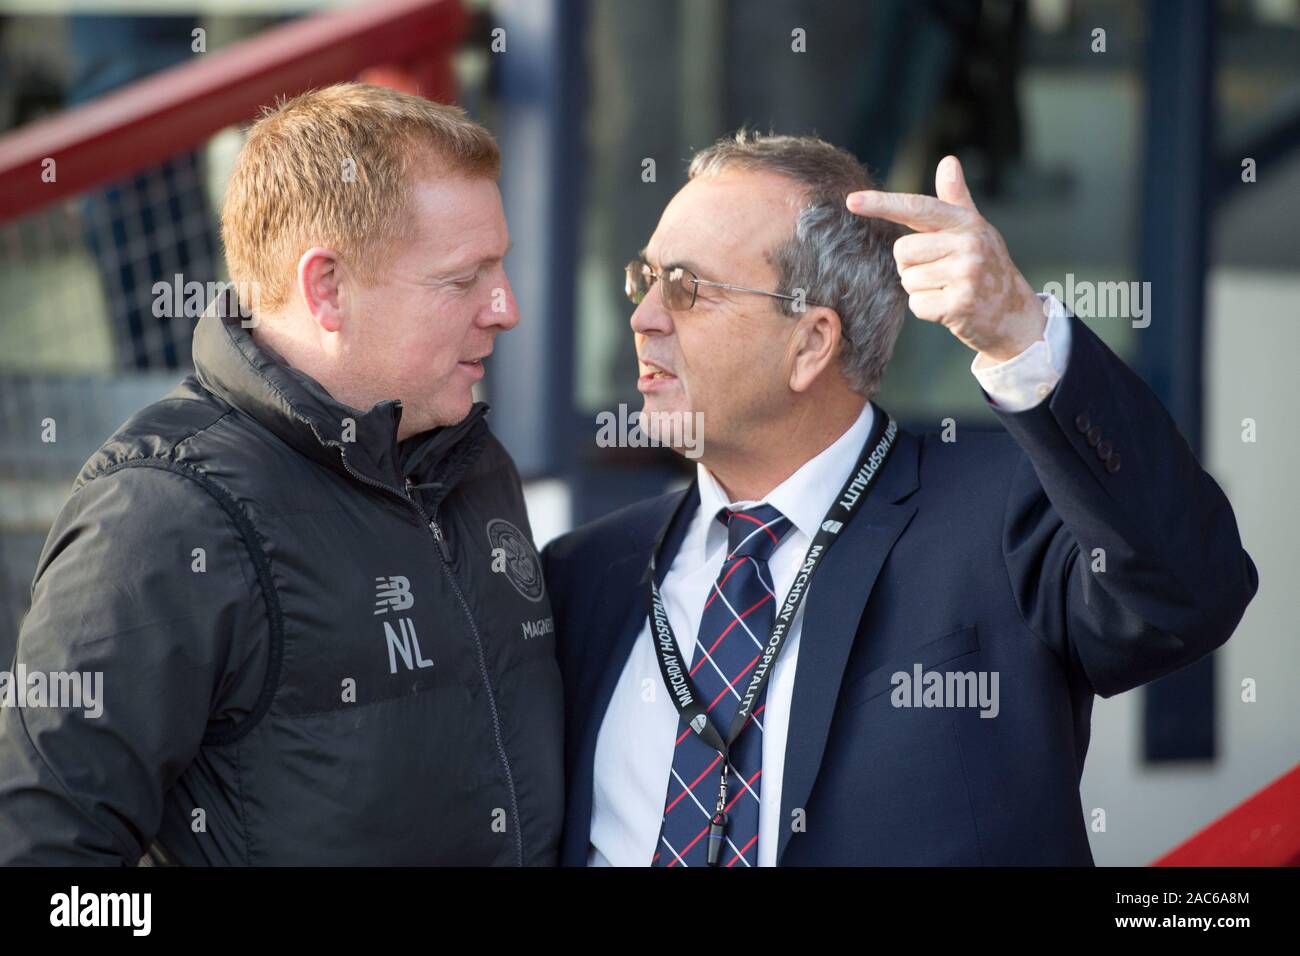 Celtic manager Neil Lennon (left) speaks to Ross County chairman Roy MacGregor before the Ladbrokes Scottish Premiership match at the Global Energy Stadium, Dingwall. Stock Photo